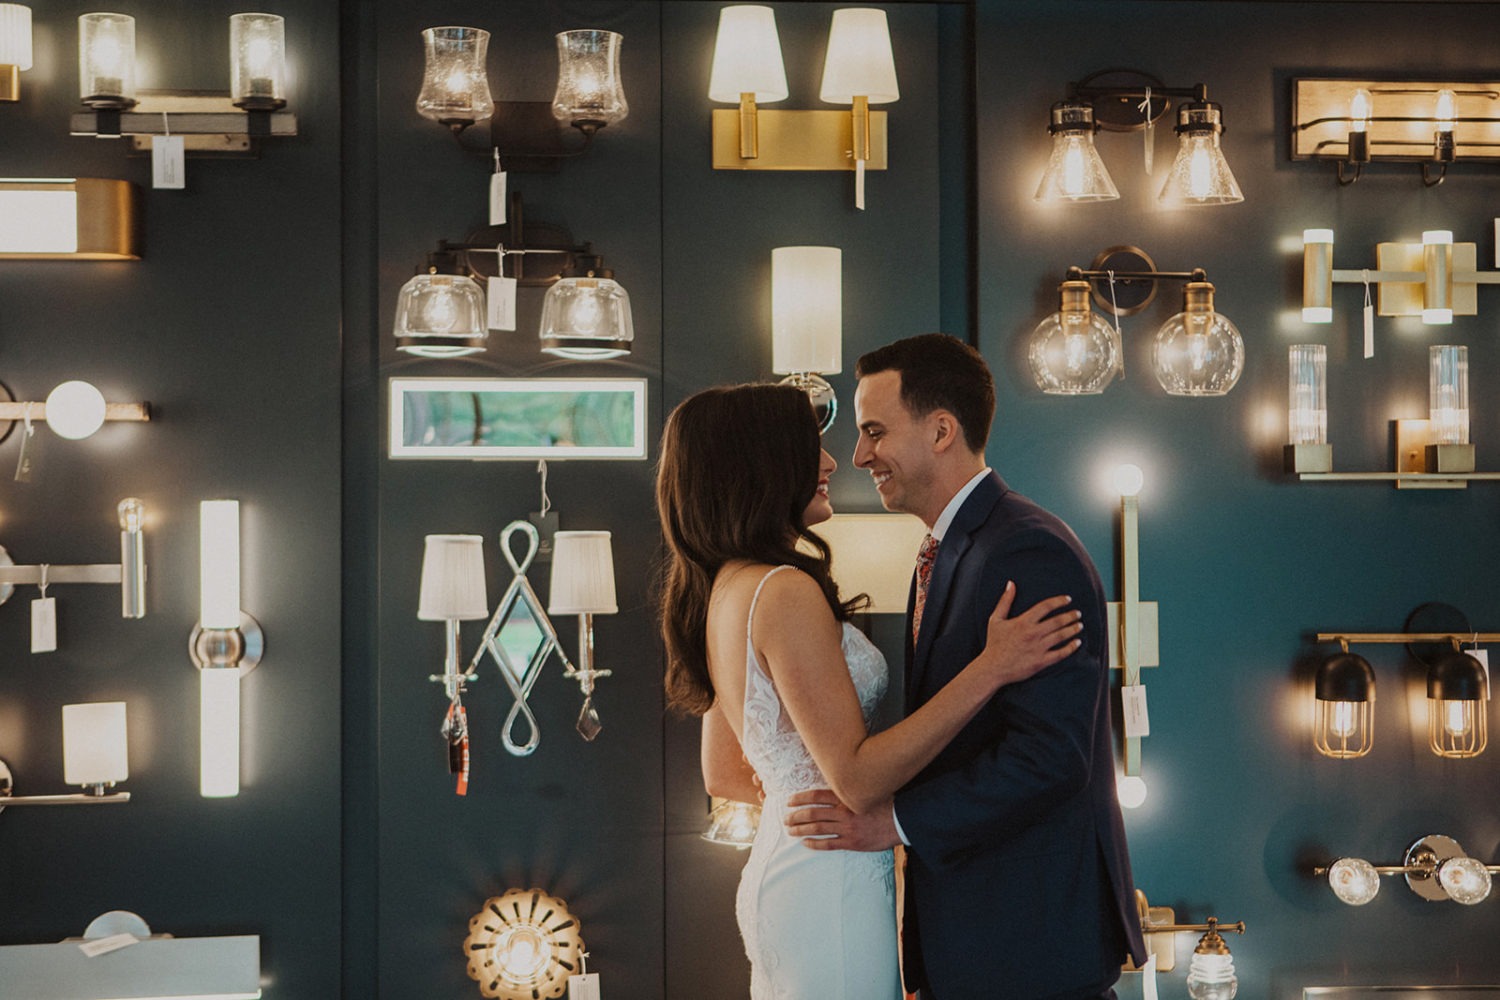 Couple embraces during wedding first look at lighting shop